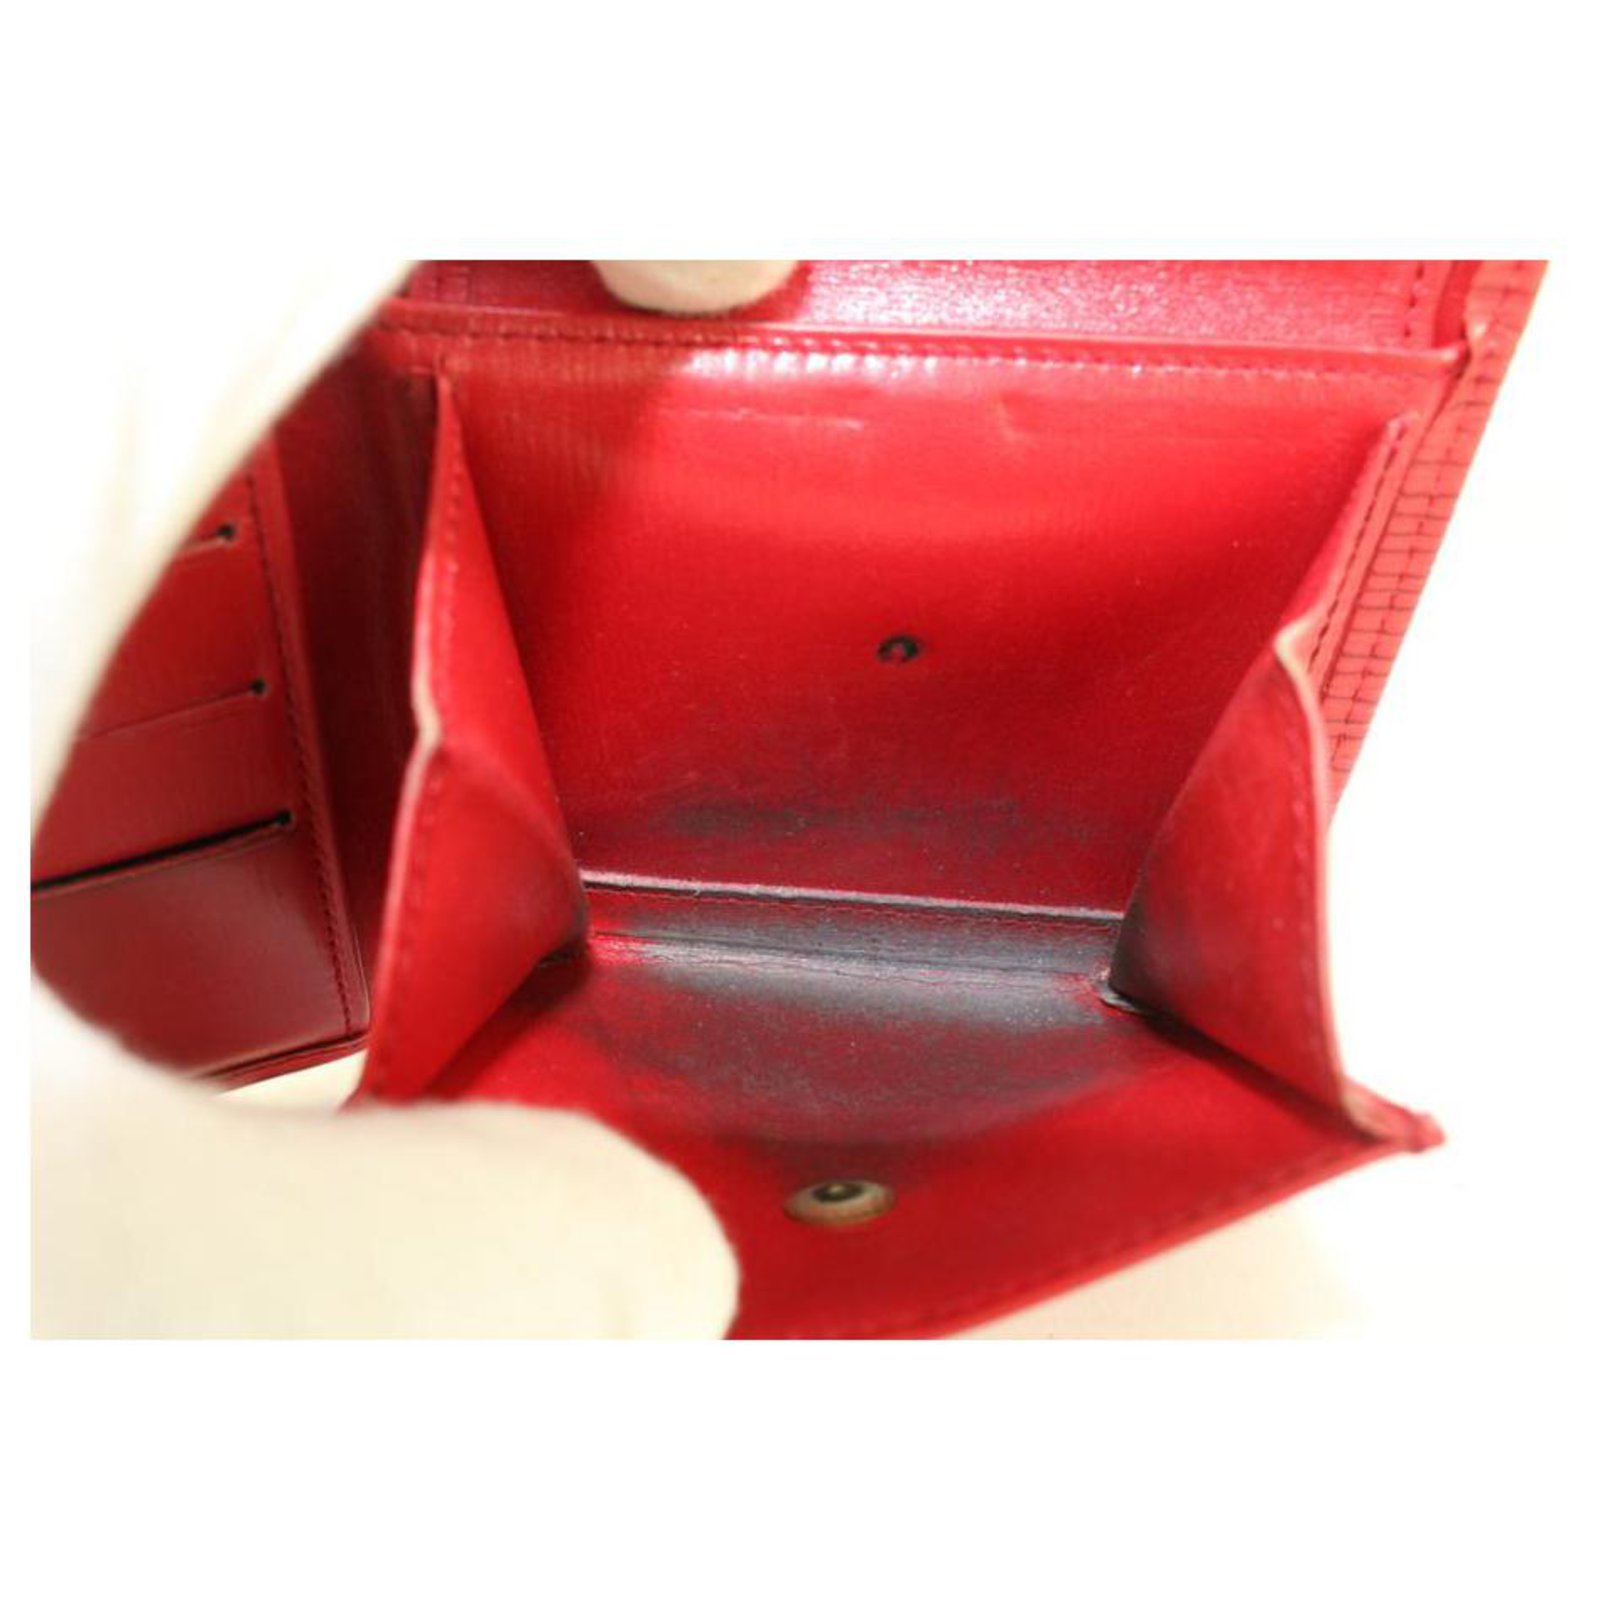 Louis Vuitton Red Epi Leather Bifold Business Card Wallet – Sell